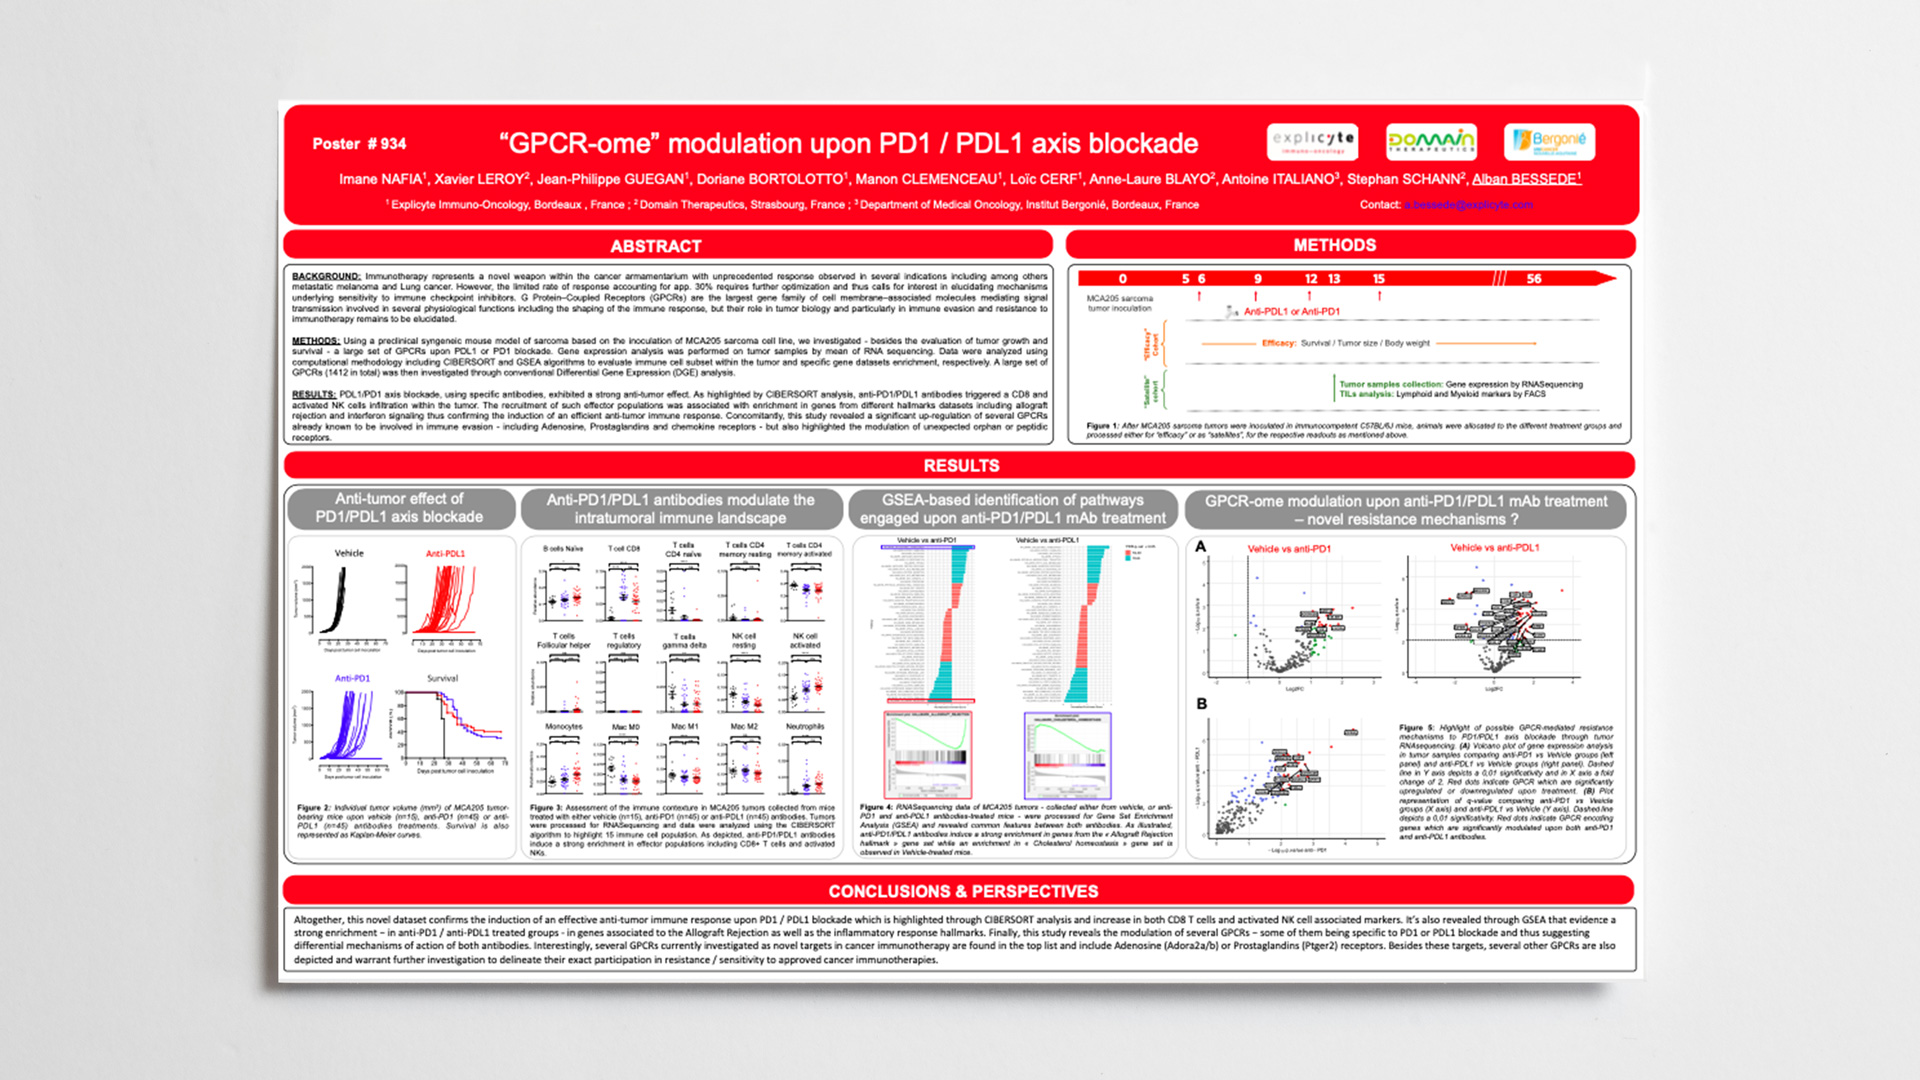 poster AACR explicyte domain